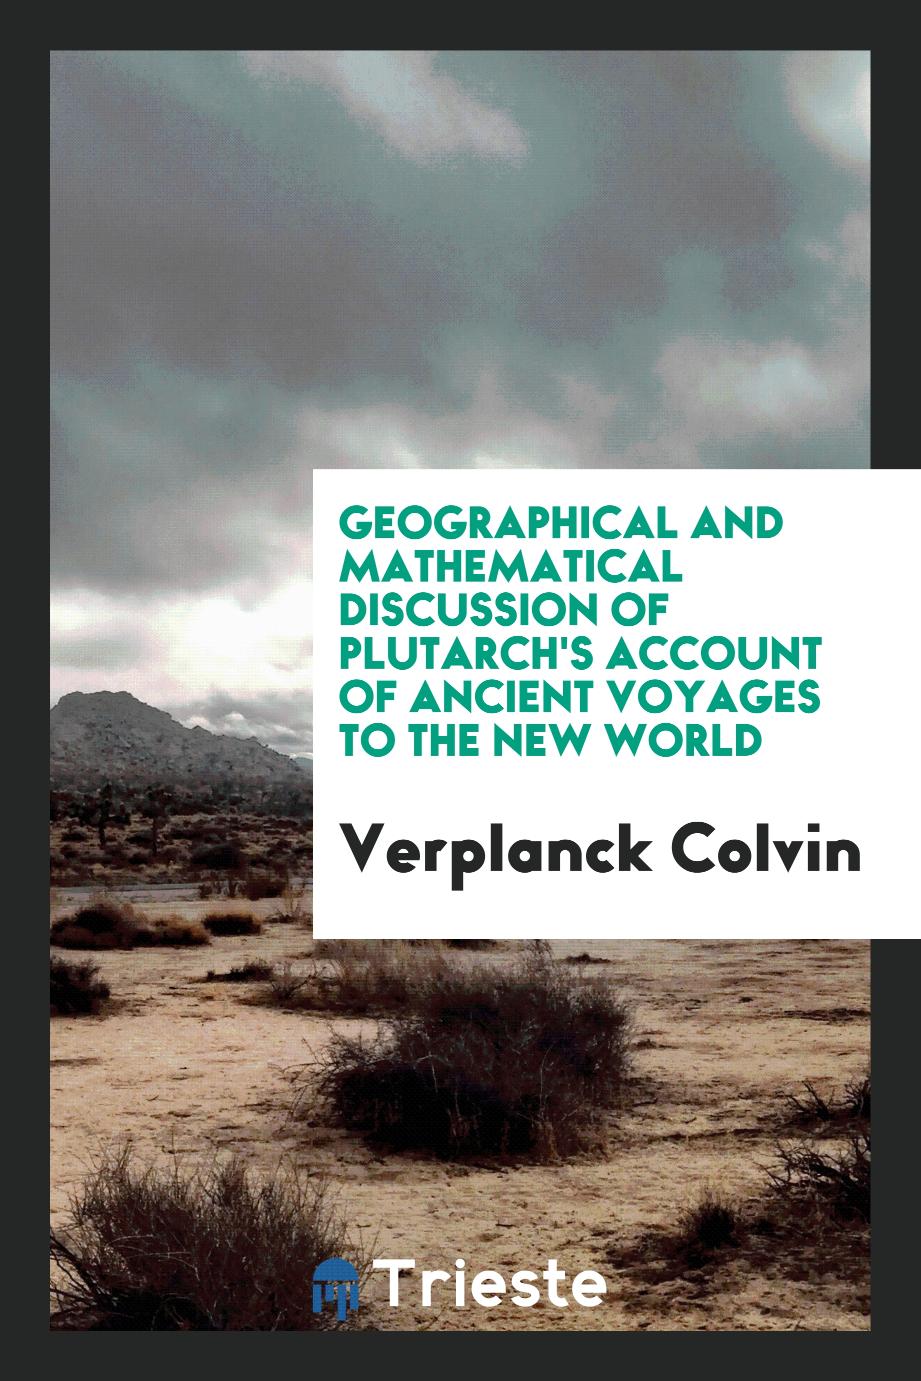 Geographical and mathematical discussion of Plutarch's account of ancient voyages to the New World